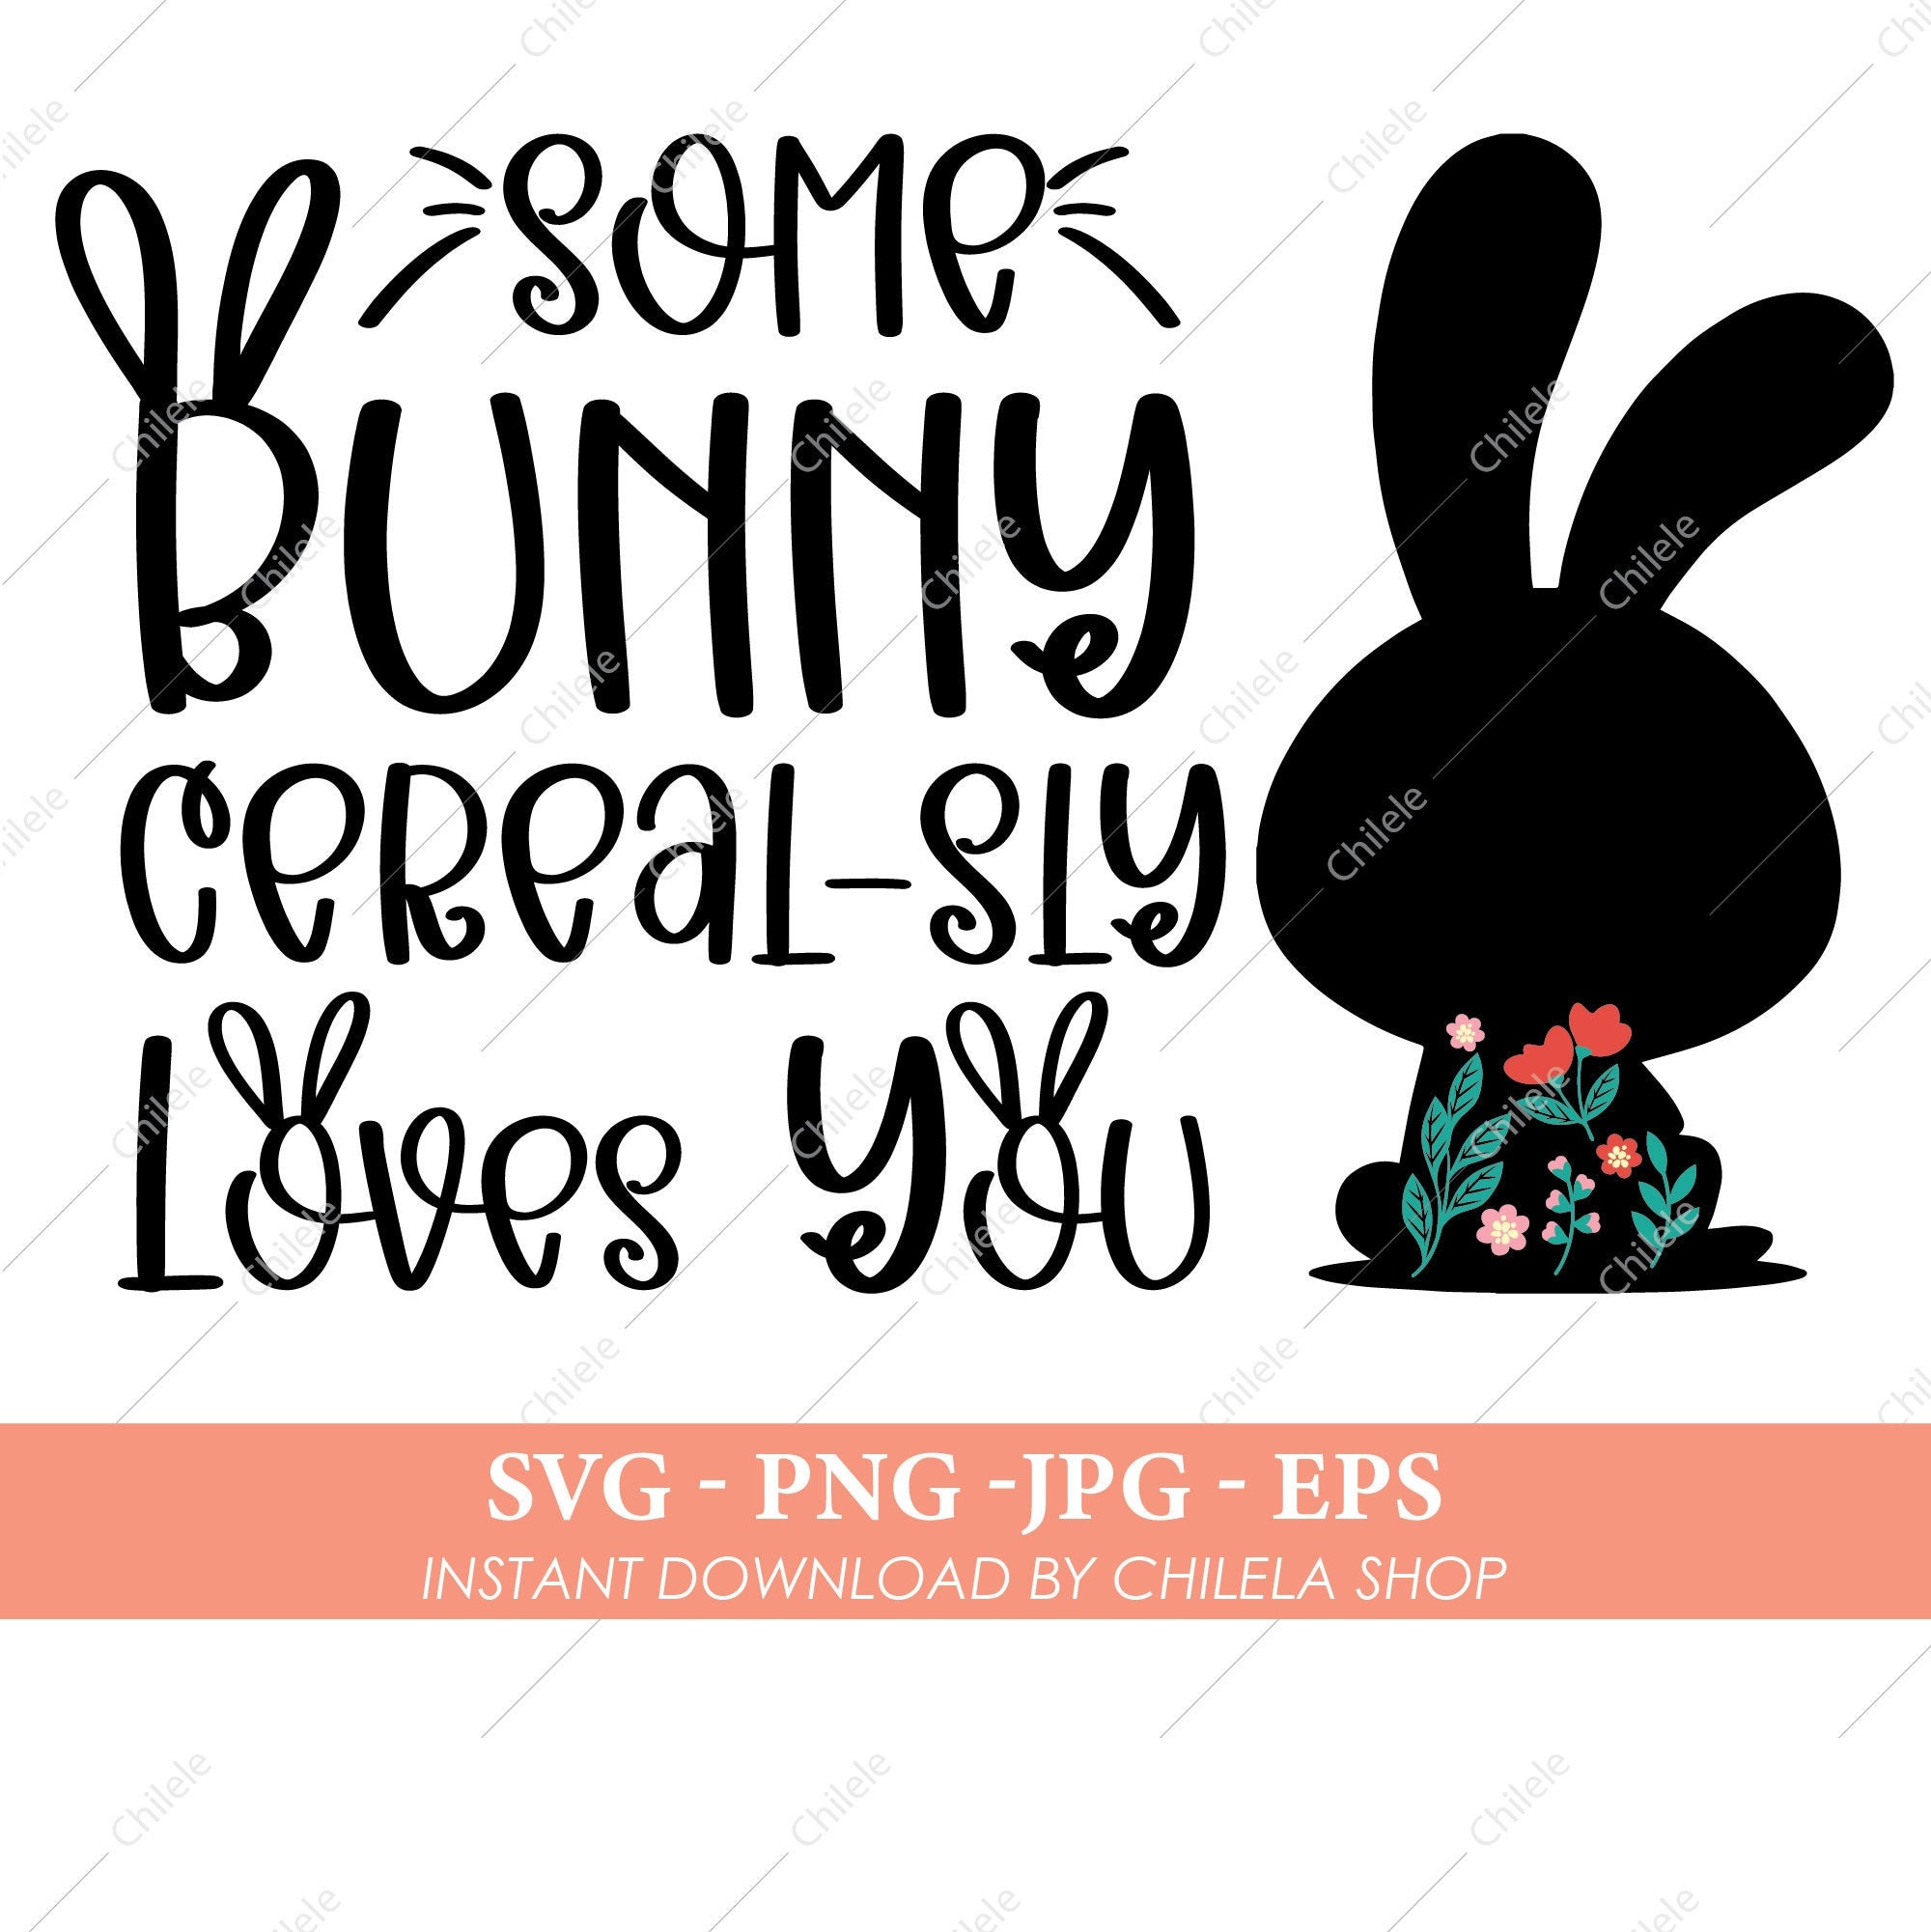 Instant download Some Bunny Cereal-sly Loves You SVG Cereal | Etsy